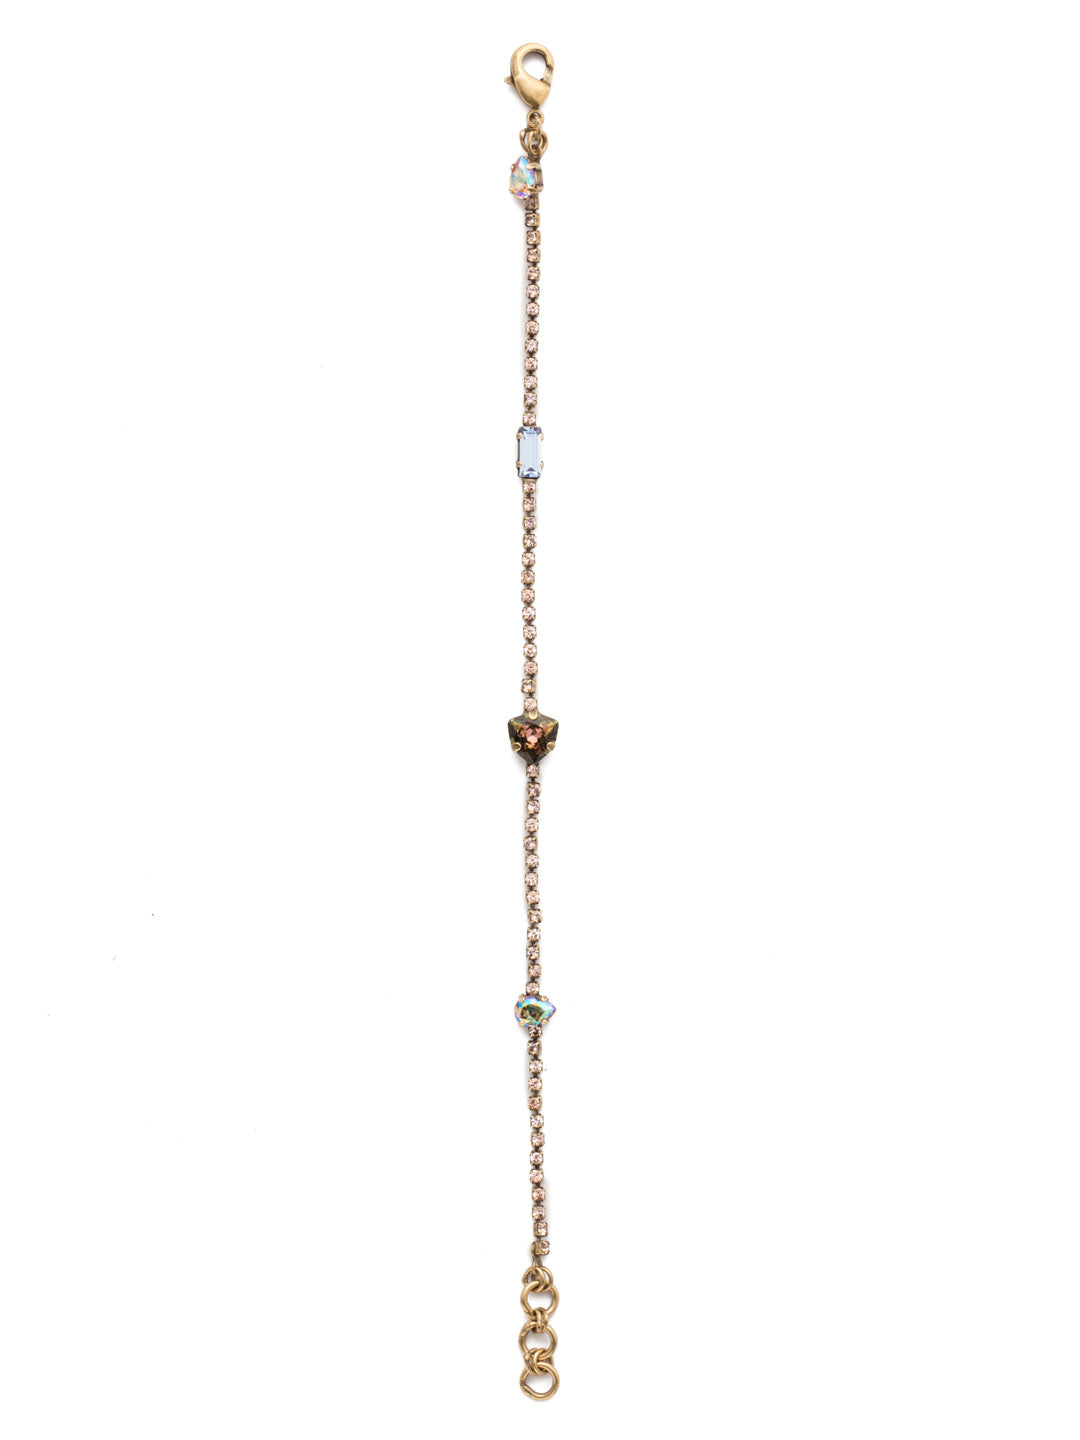 Ophelia Tennis Bracelet - BEP9AGSDE - <p>The Ophelia Tennis Bracelet is dainty and perfect for layering. Delicate round crystals are accented by a touch of larger pieces in navette, pear and bagette shapes and varying shades. From Sorrelli's Selvedge Denim collection in our Antique Gold-tone finish.</p>